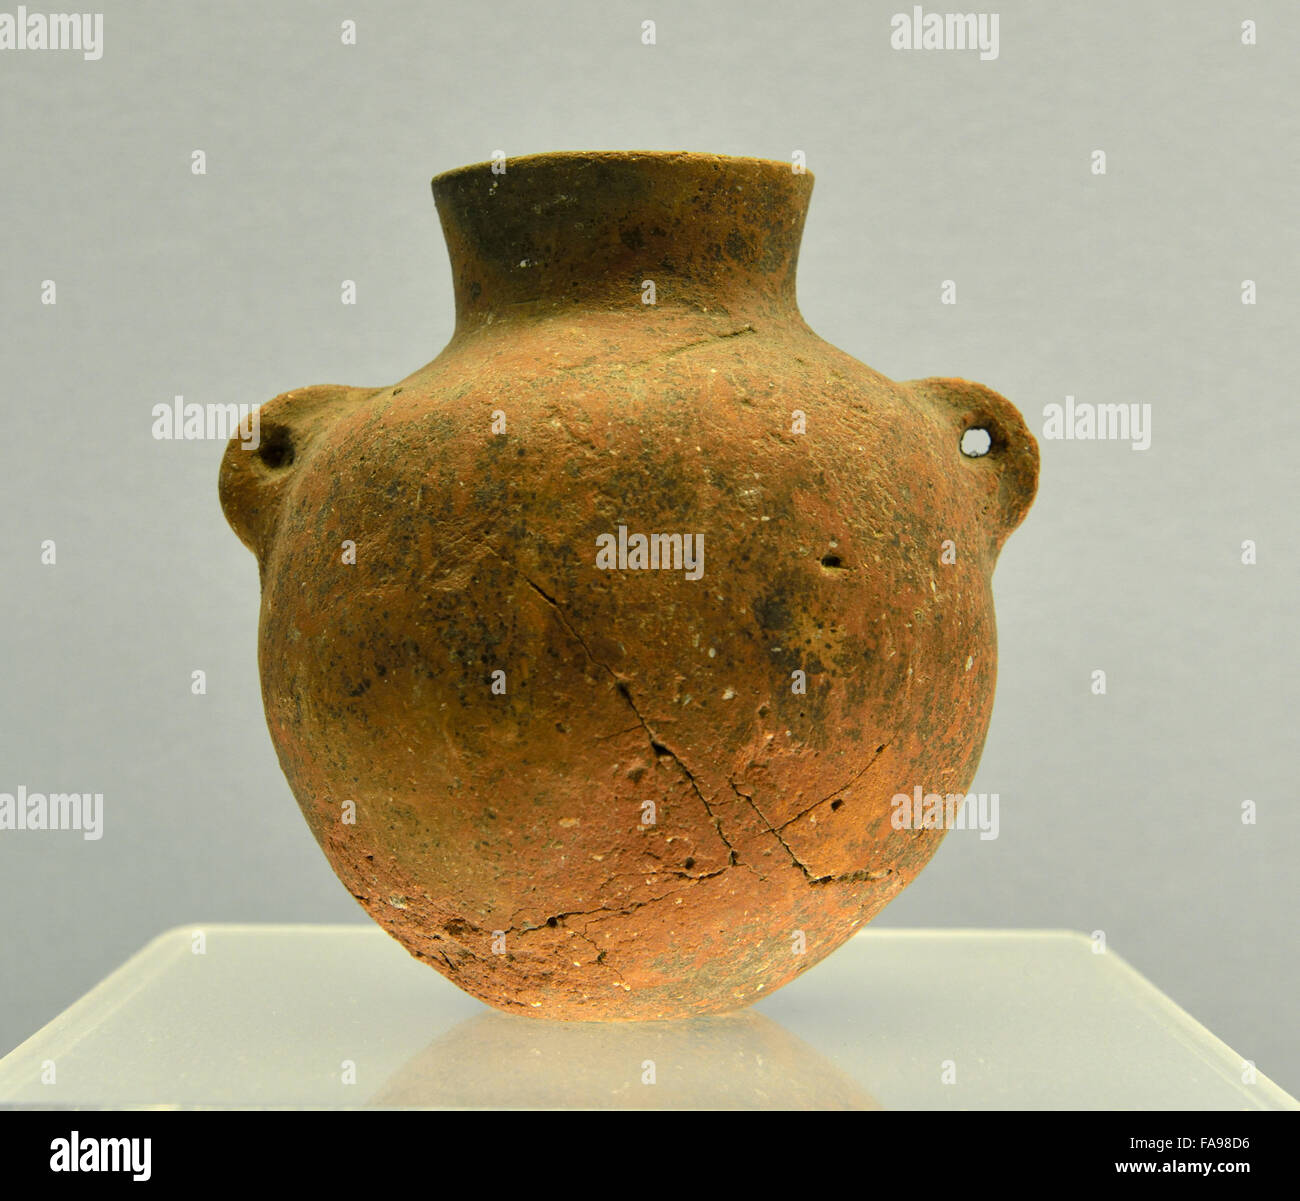 Shanghai Museum. Red Pottery Pot With Two Ears, Peiligang Culture, 60005200 B.C. Stock Photo